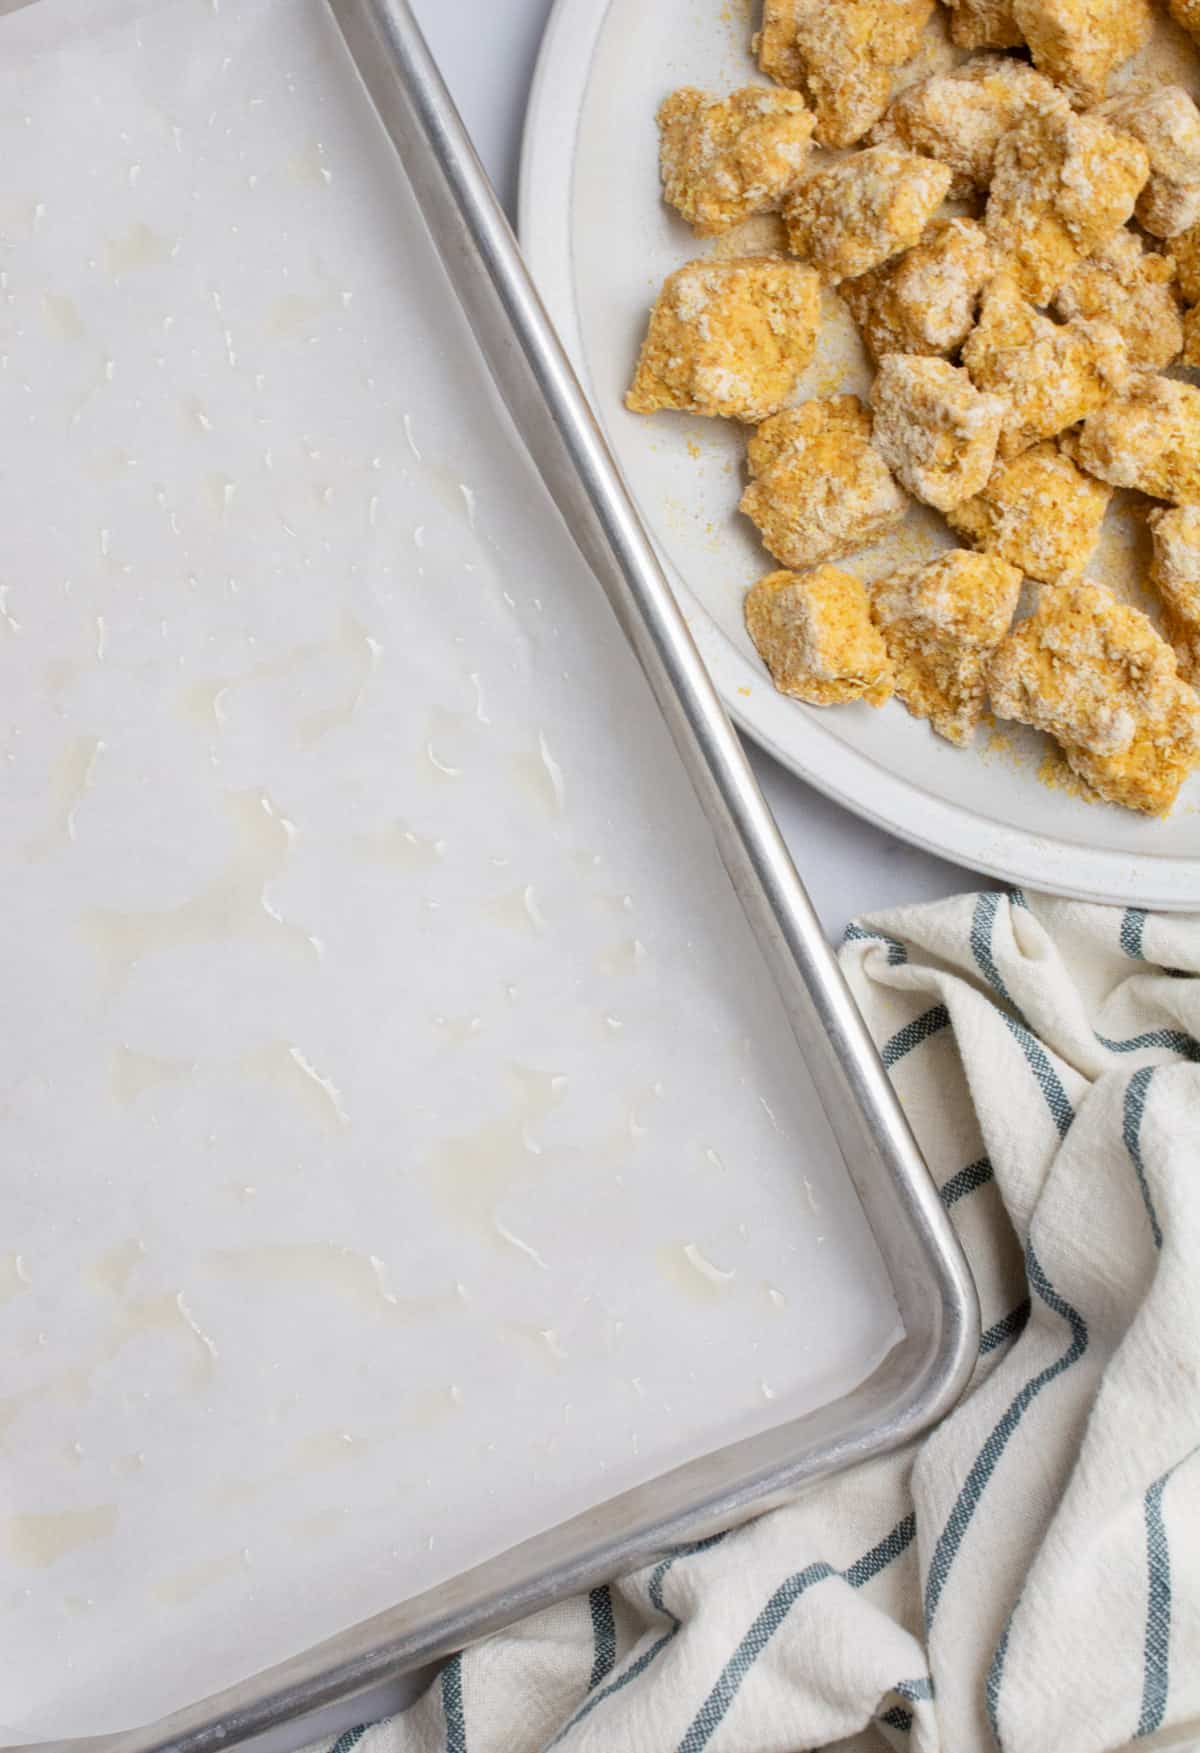 A baking sheet lined with parchment paper and a plate of breaded tofu.